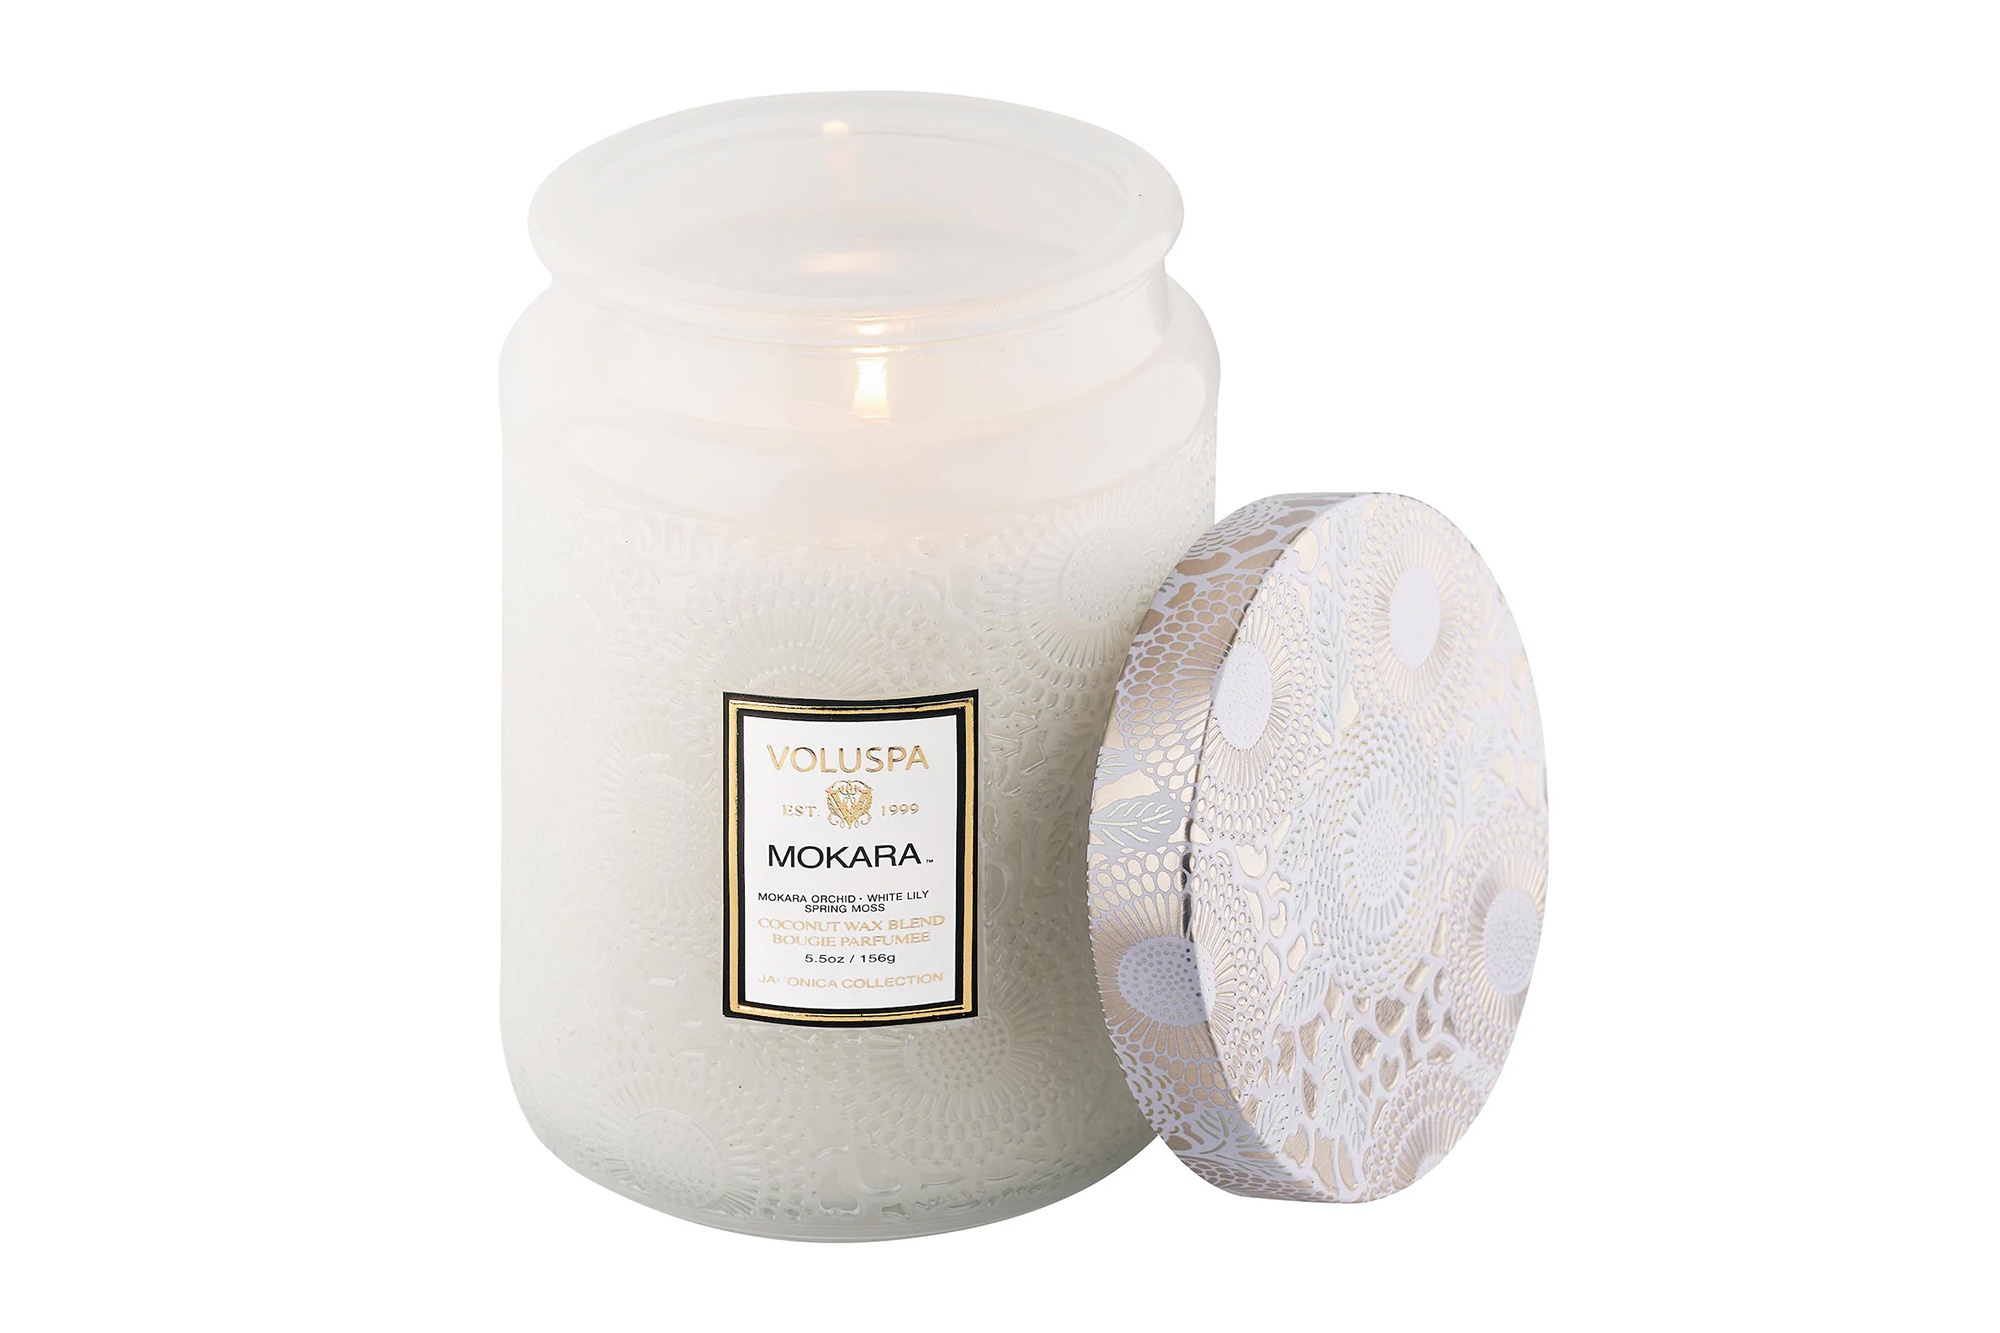 A white lit candle from Volupsa